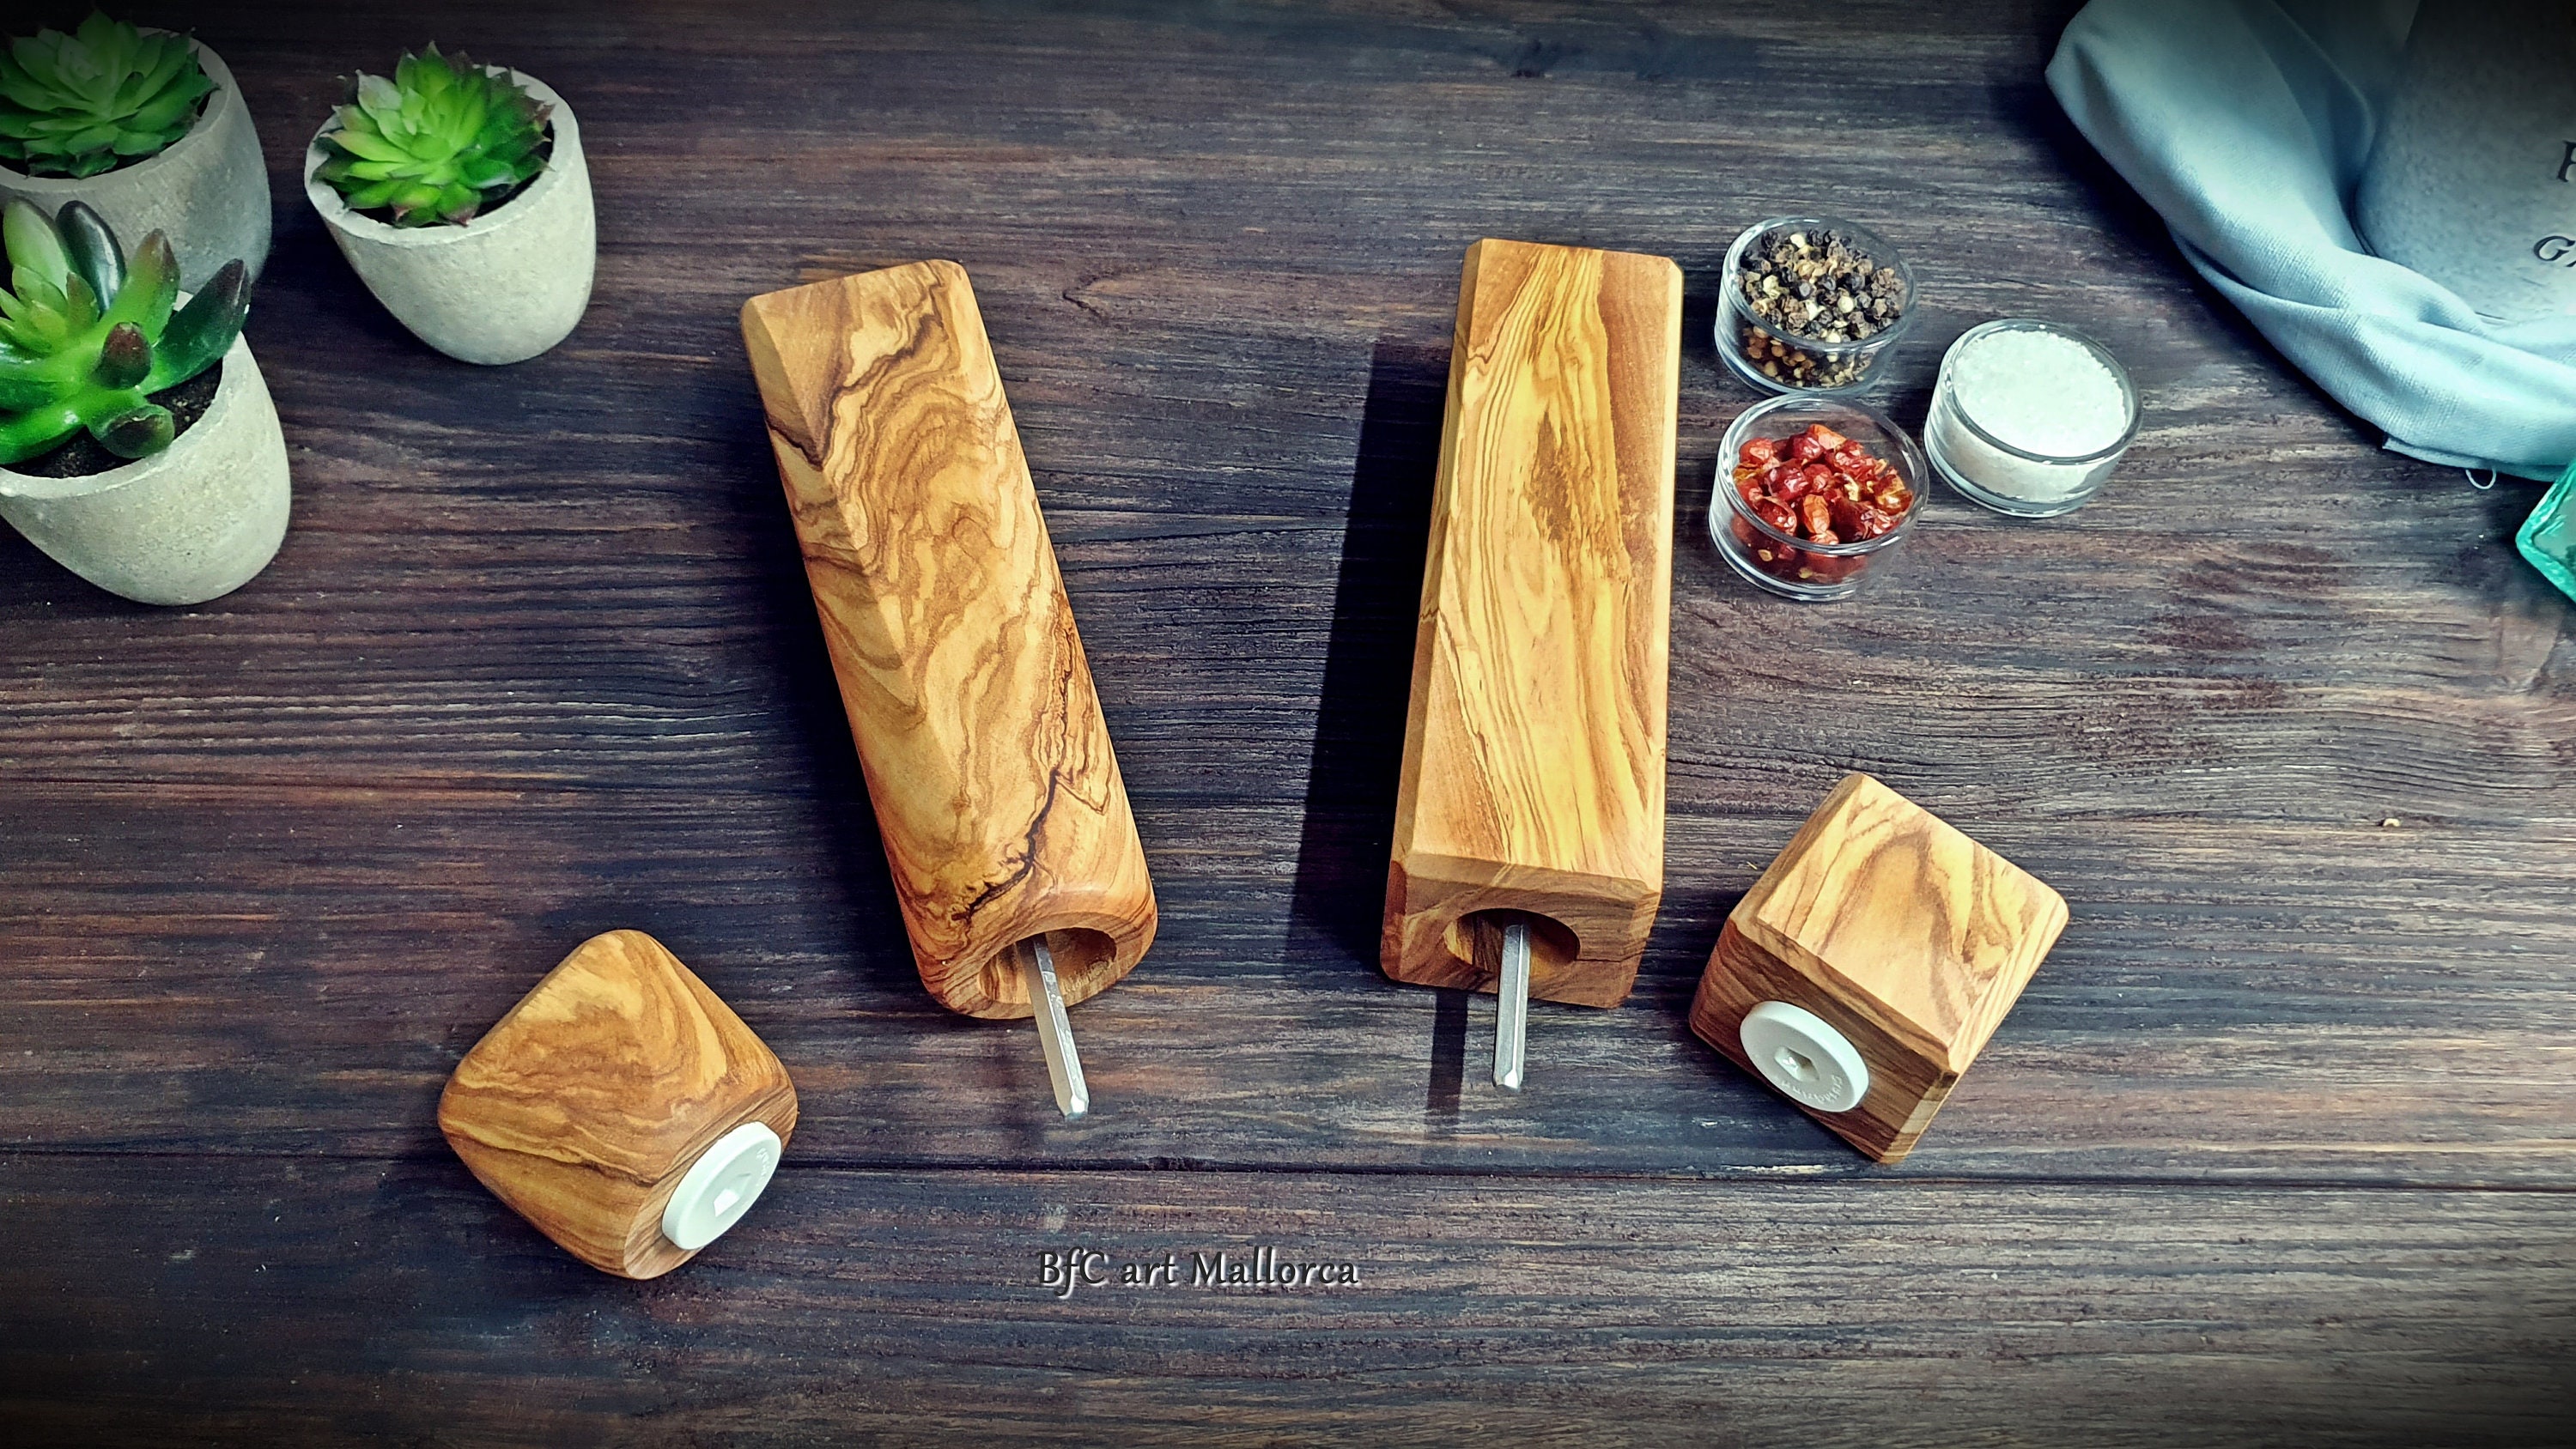 Antique Style Pepper Mill and Salt Mill Set in Olive Wood - Sokolowski  Studios